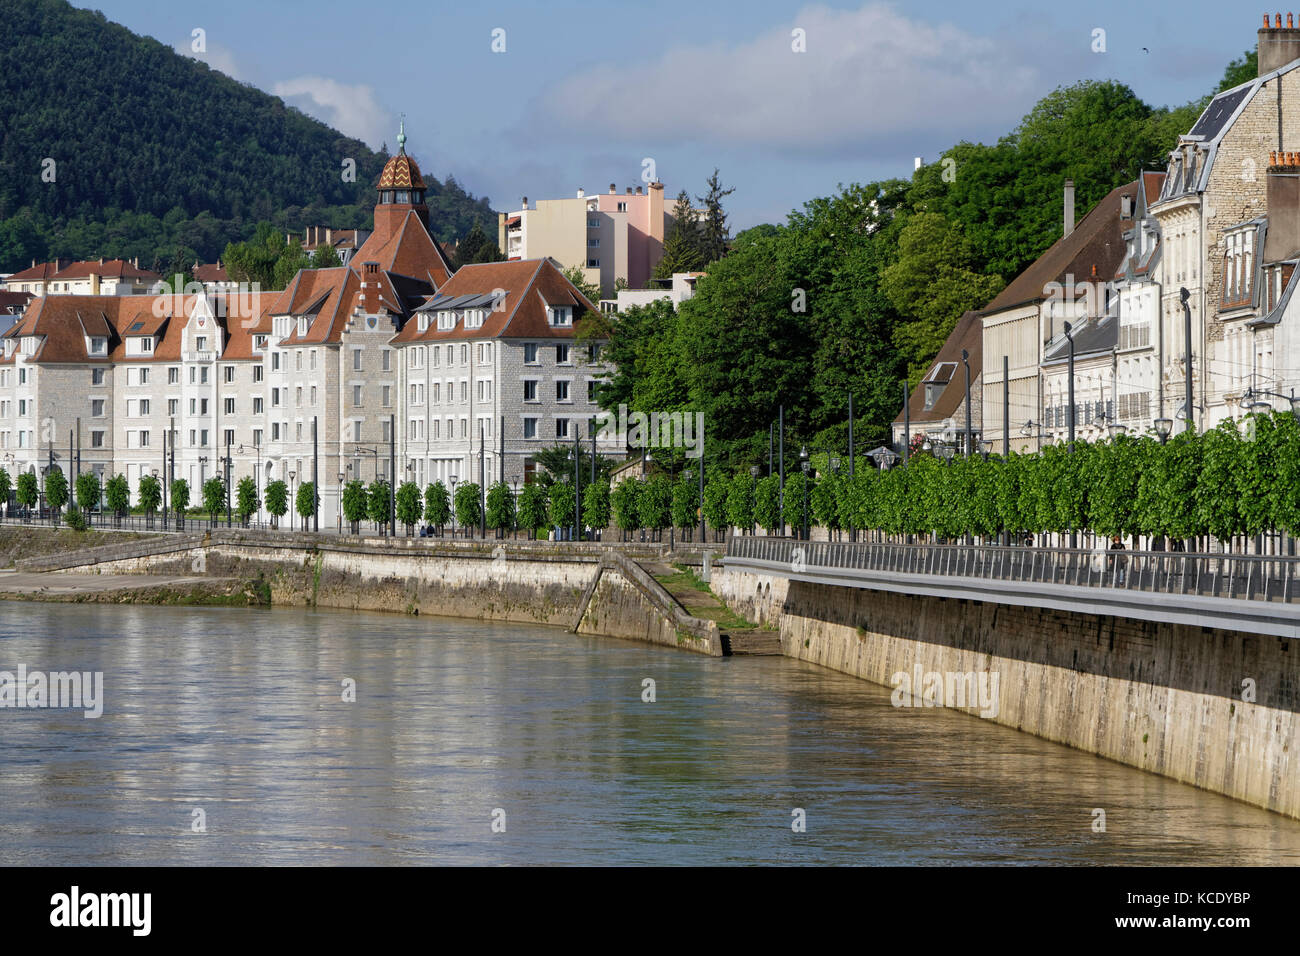 BESANCON, FRANCE, May 15, 2016 : Besancon has been labeled a 'Town of Art and History'. Since 2008, Besancon's Vauban citadel has been listed as a UNE Stock Photo